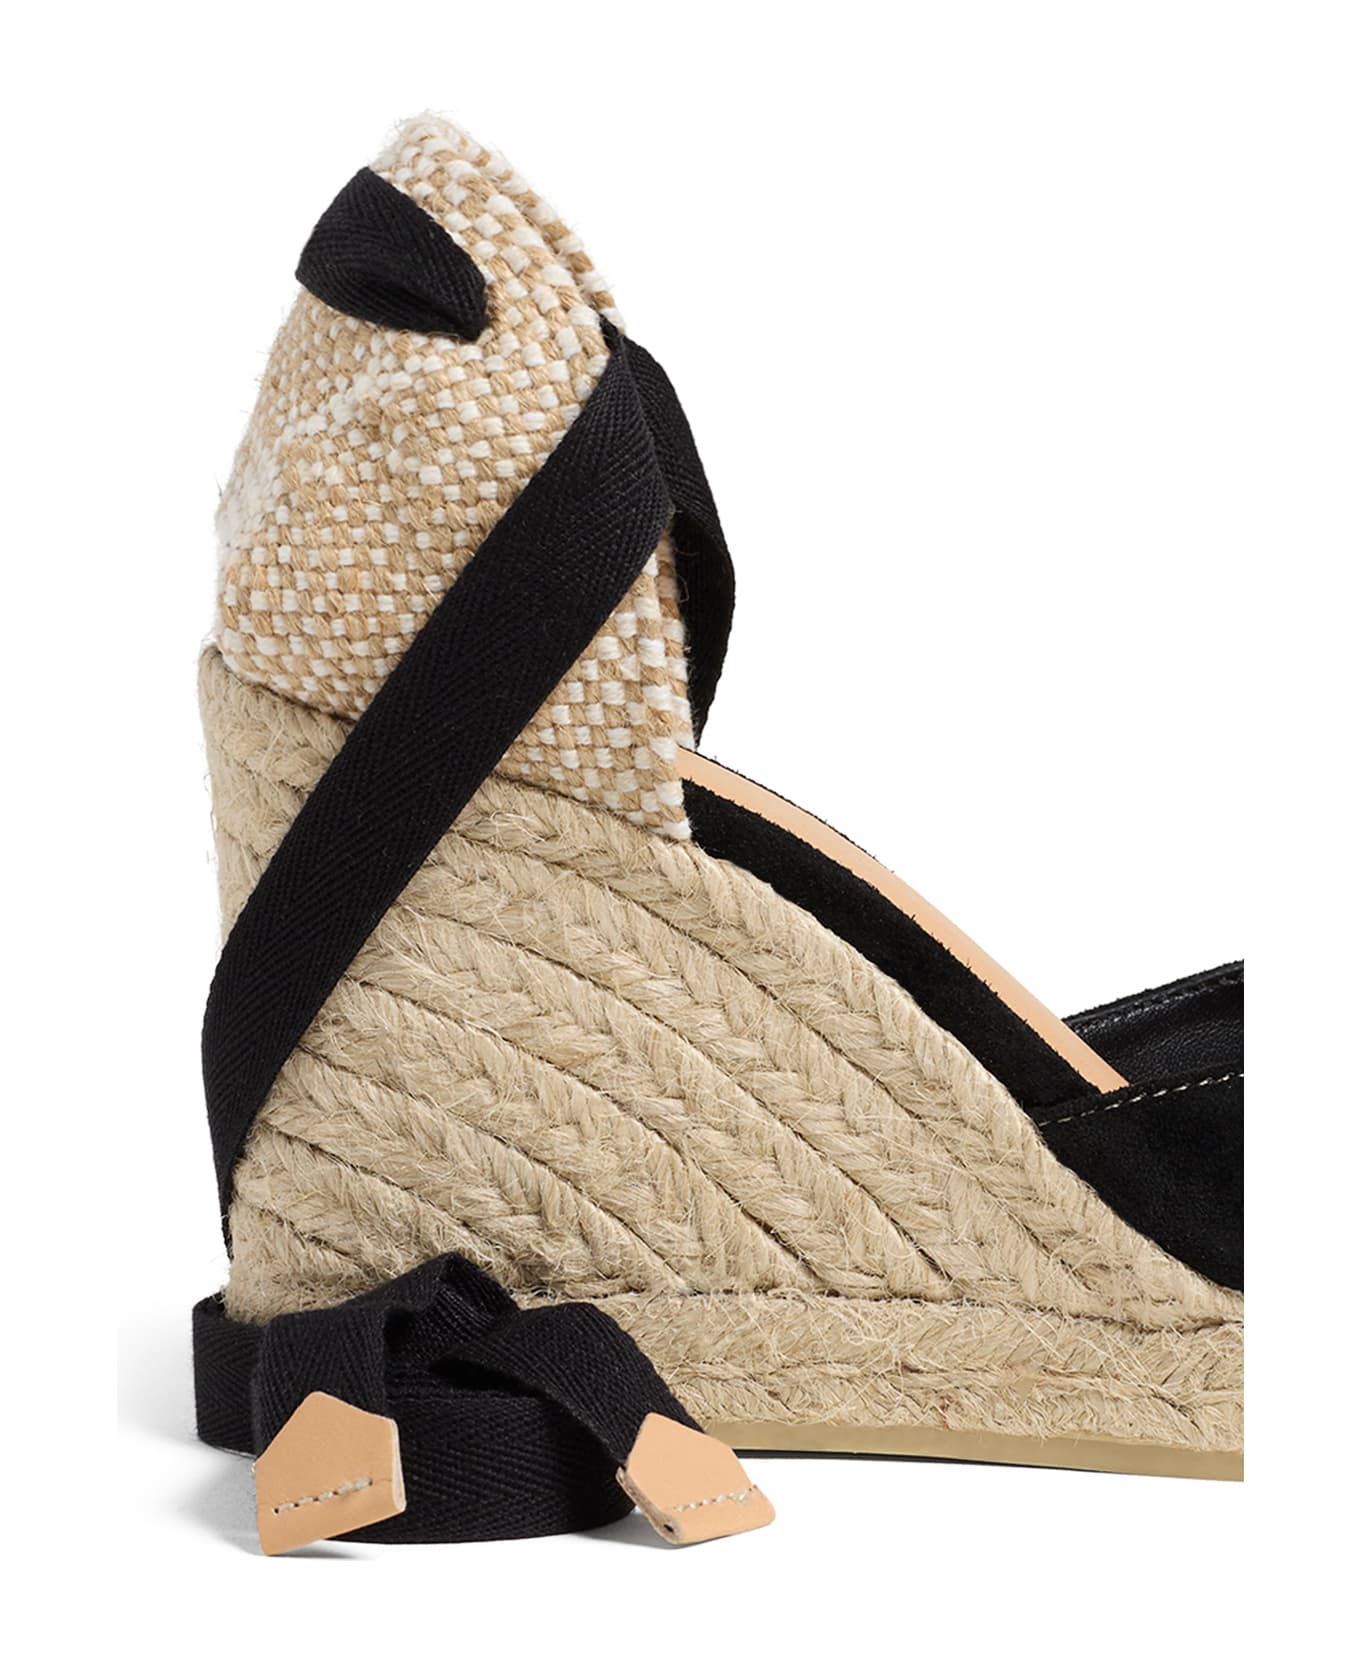 Castañer Suede Espadrilles With Ankle Laces - NERO ウェッジシューズ